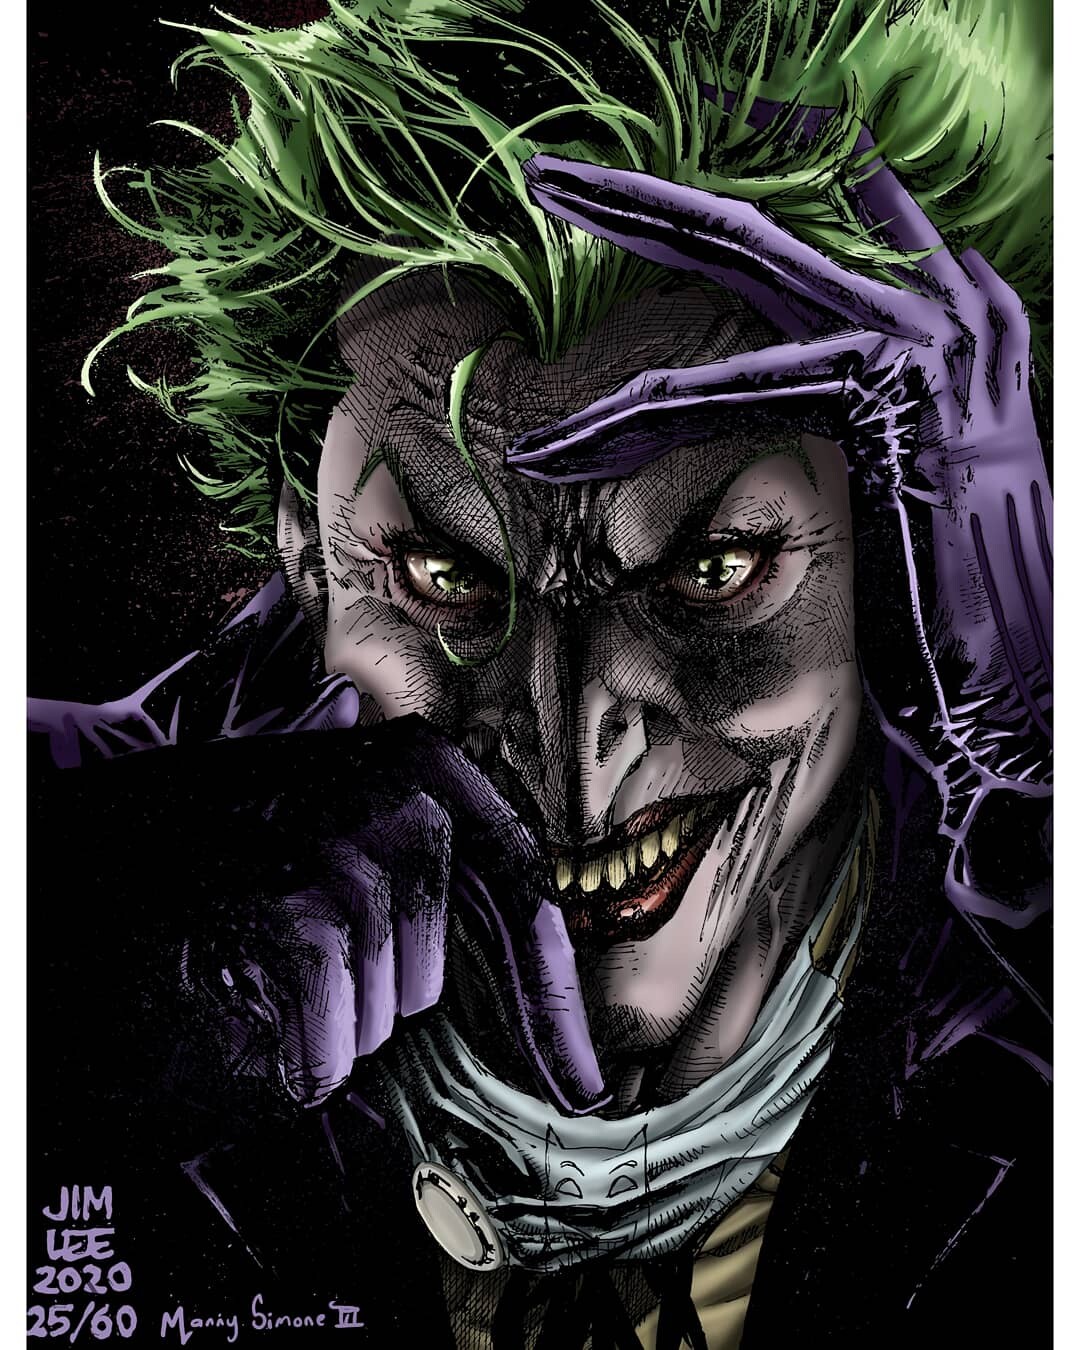 ArtStation - The Joker Colored By Me (drawn by Jim Lee)